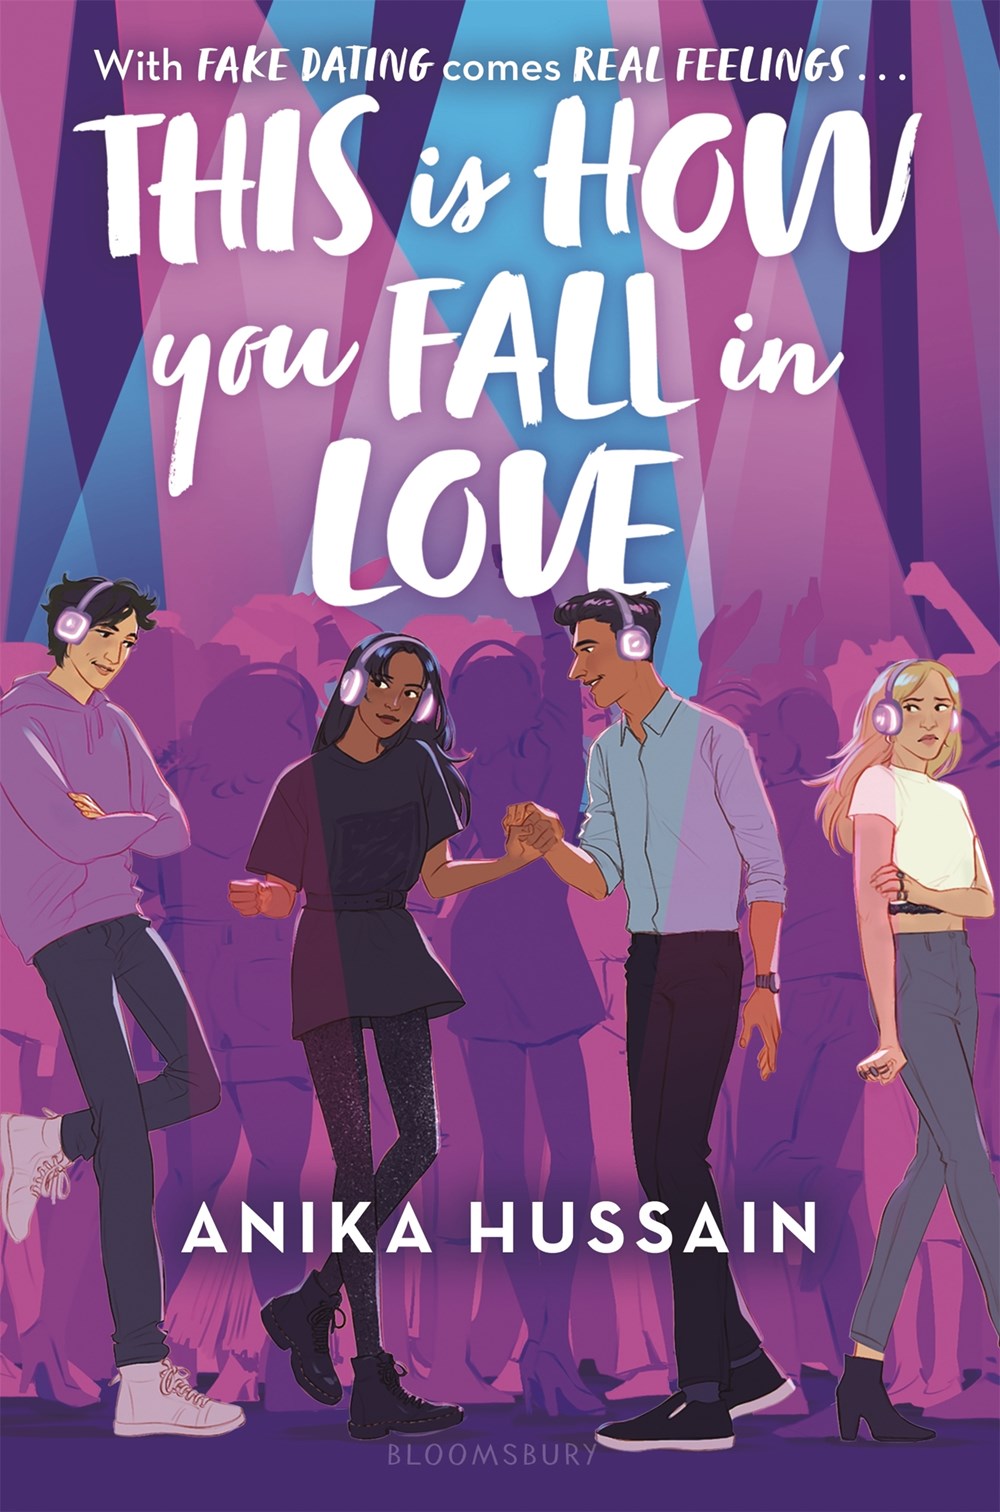 This is How You Fall in Love by Anika Hussain